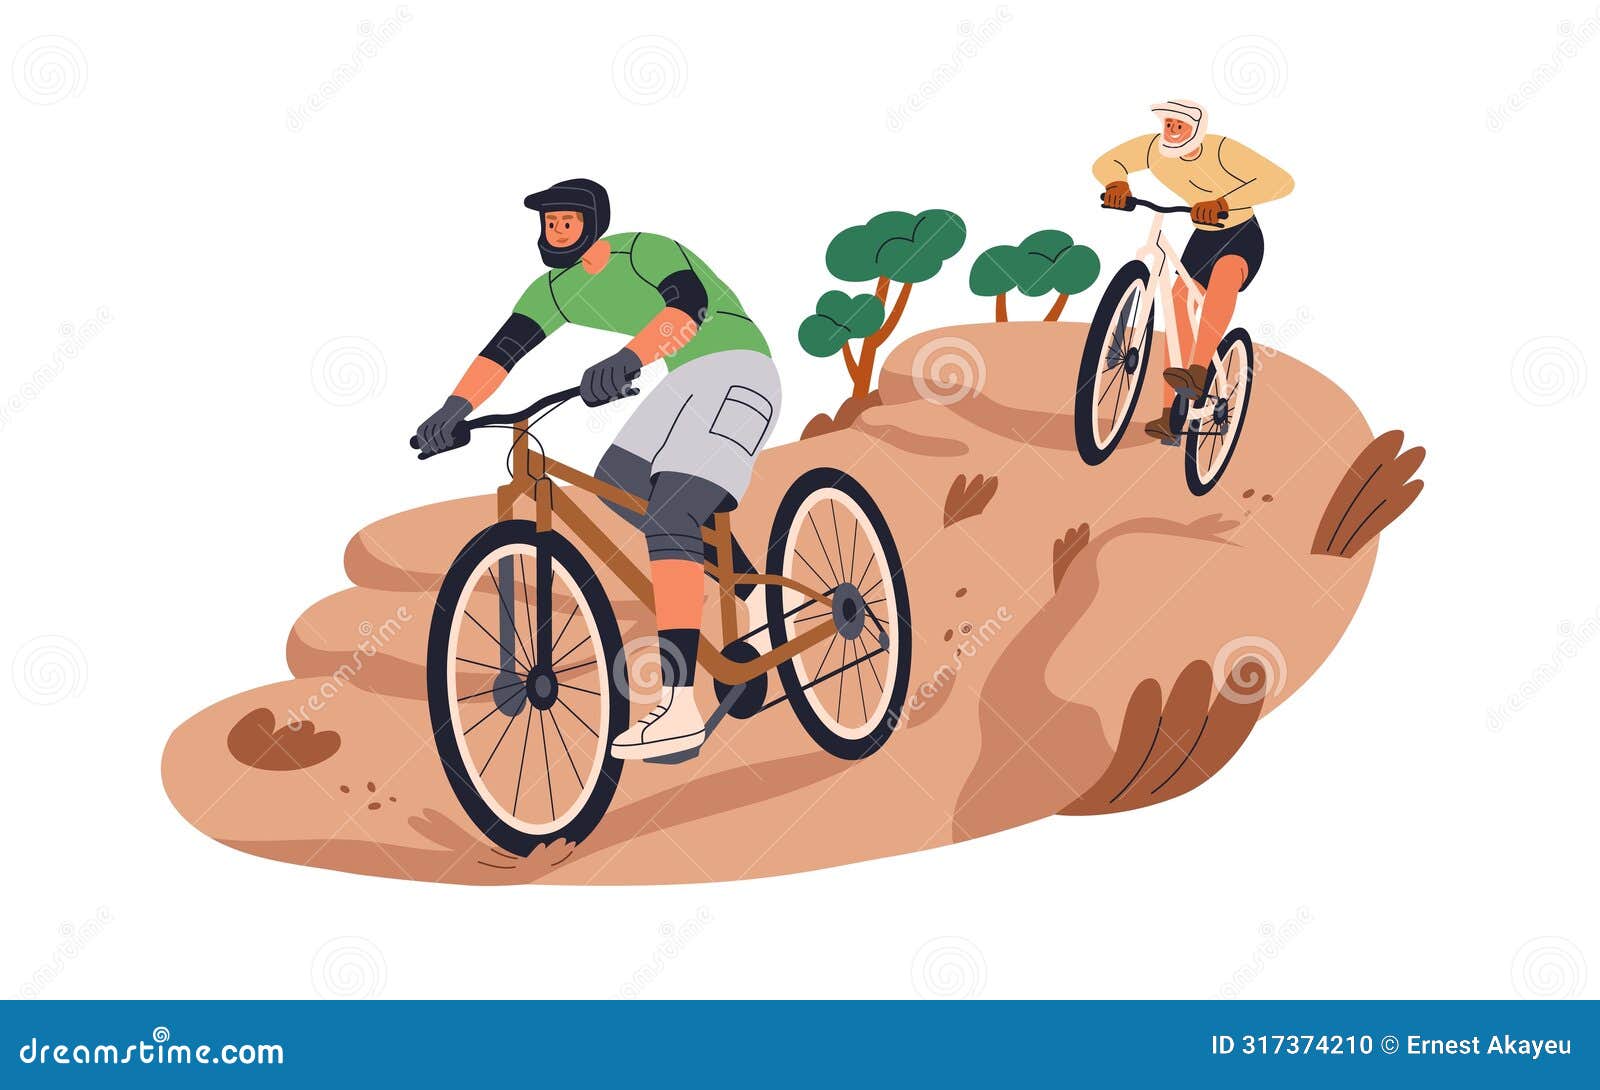 mountain bike adventure on rocky trail. active men friends cyclists in helmets, riding bicycles, extreme cycling. mtb